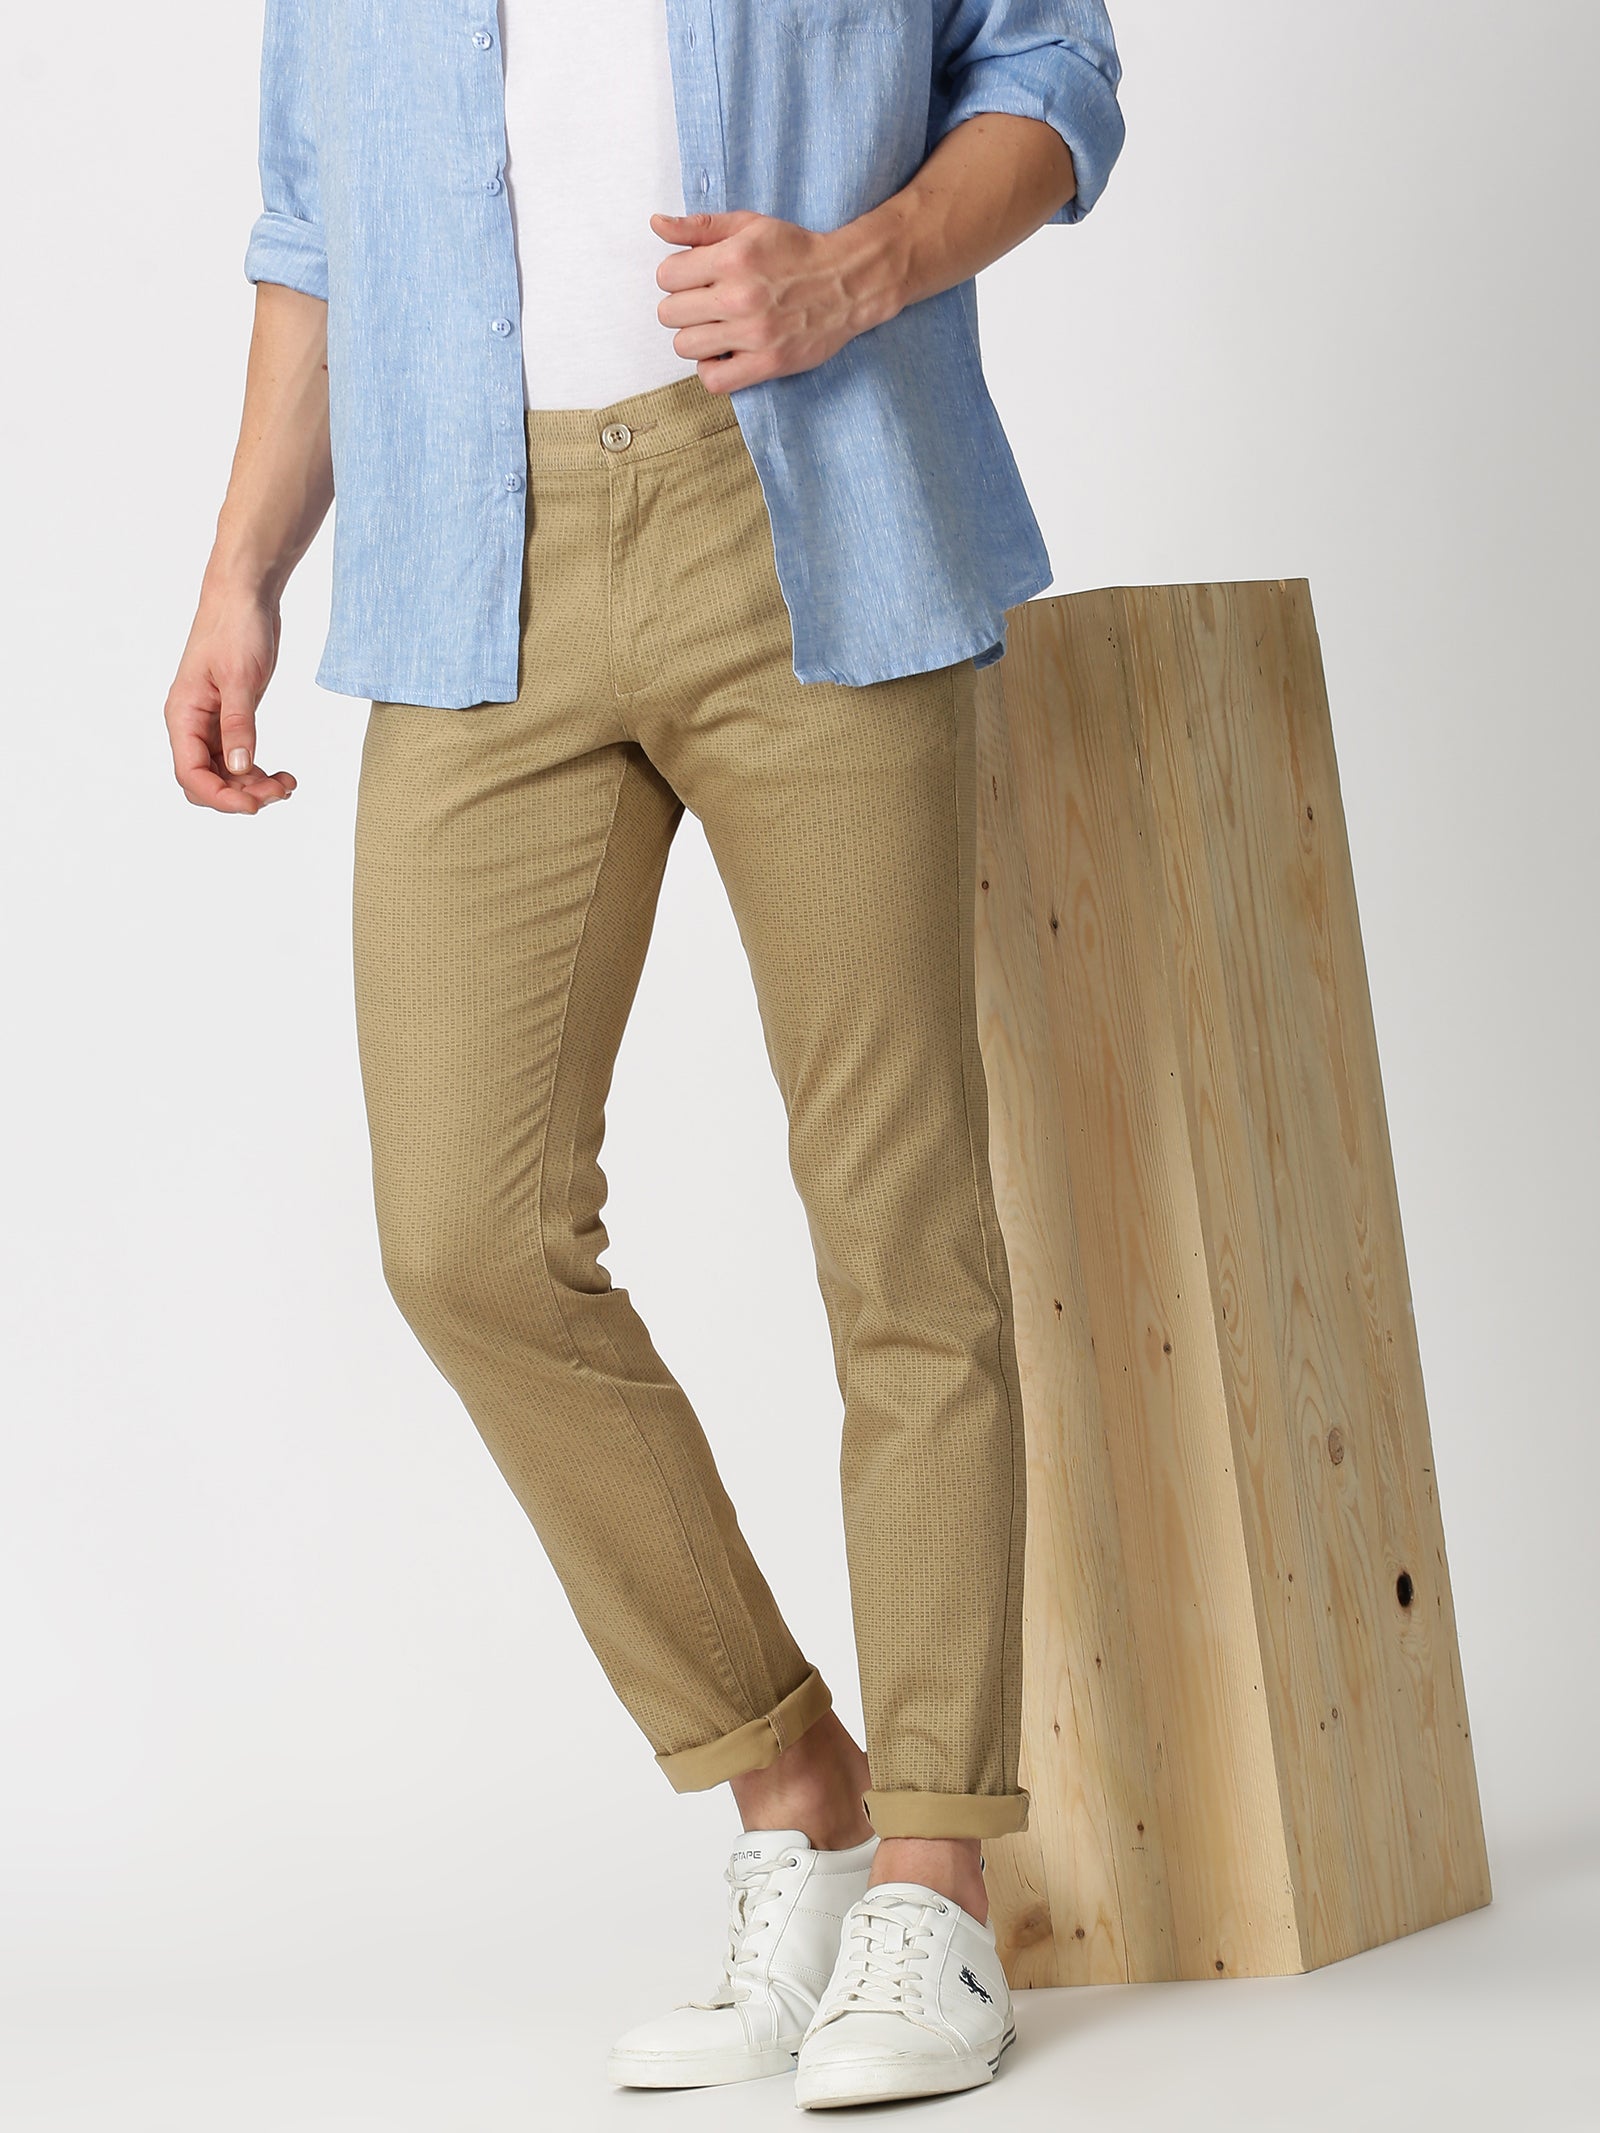 Gap Olive Trousers - Buy Gap Olive Trousers online in India